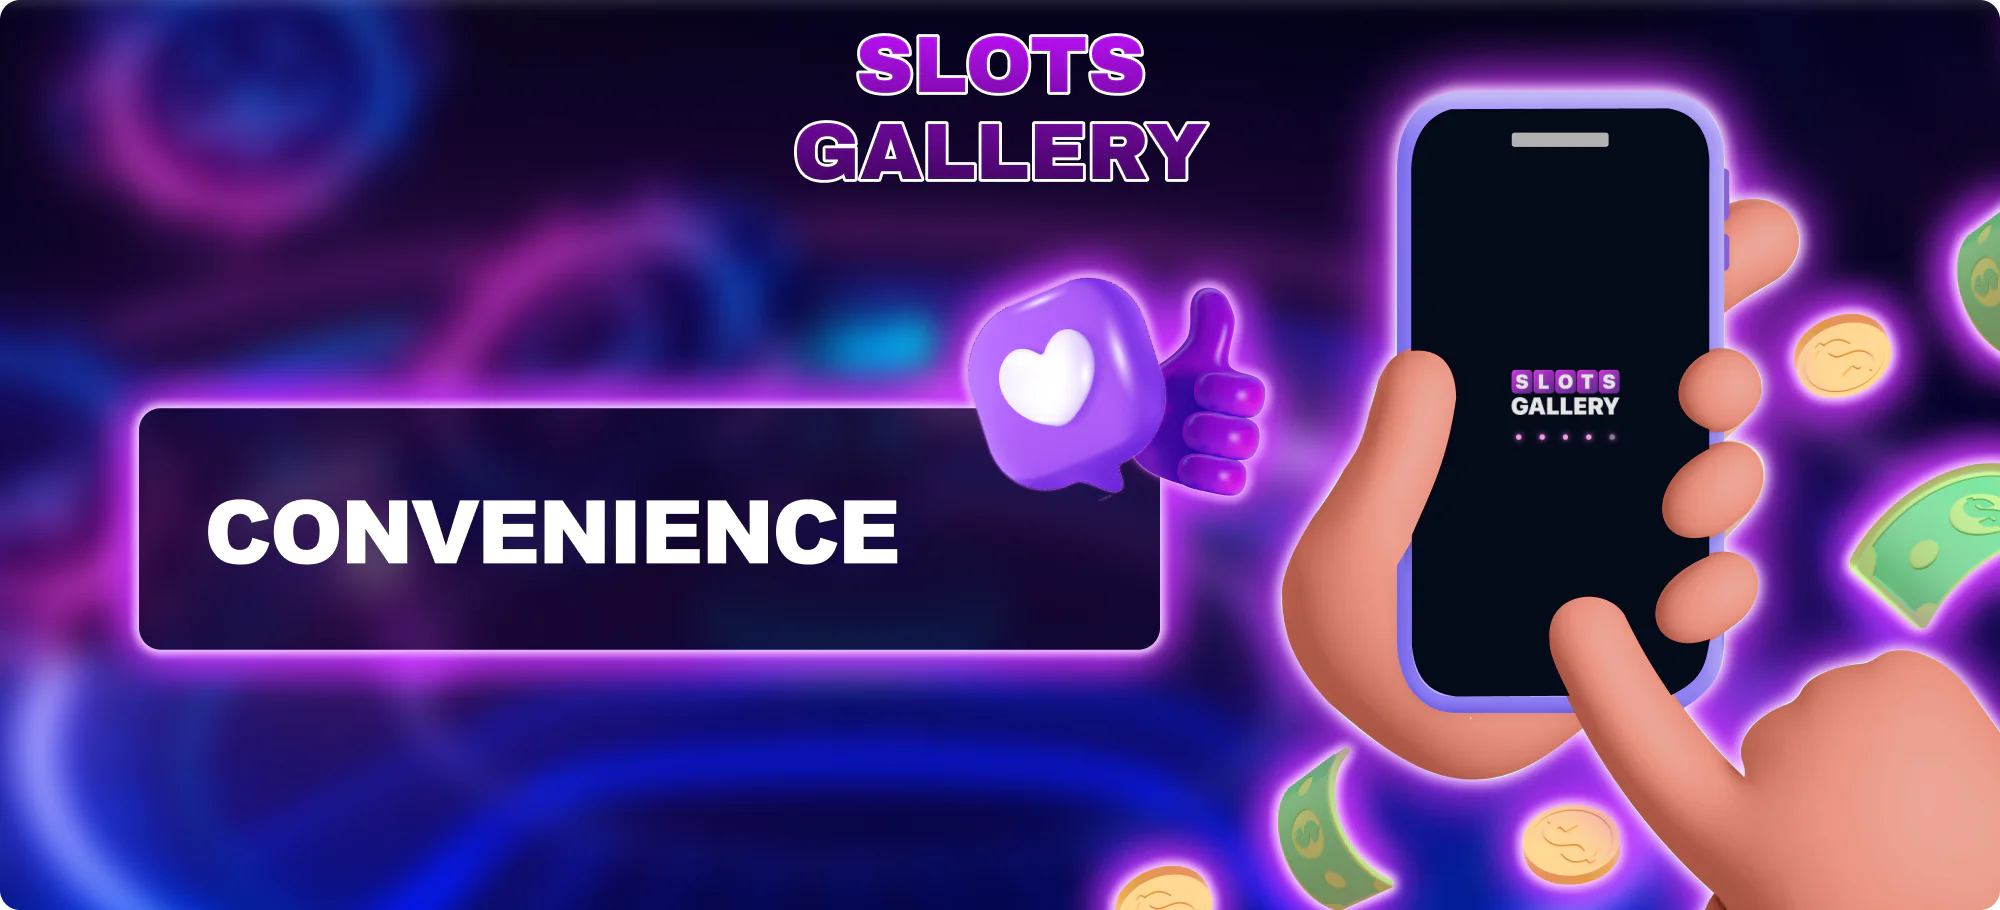 Convenient Mobile App for Players - Slots Gallery